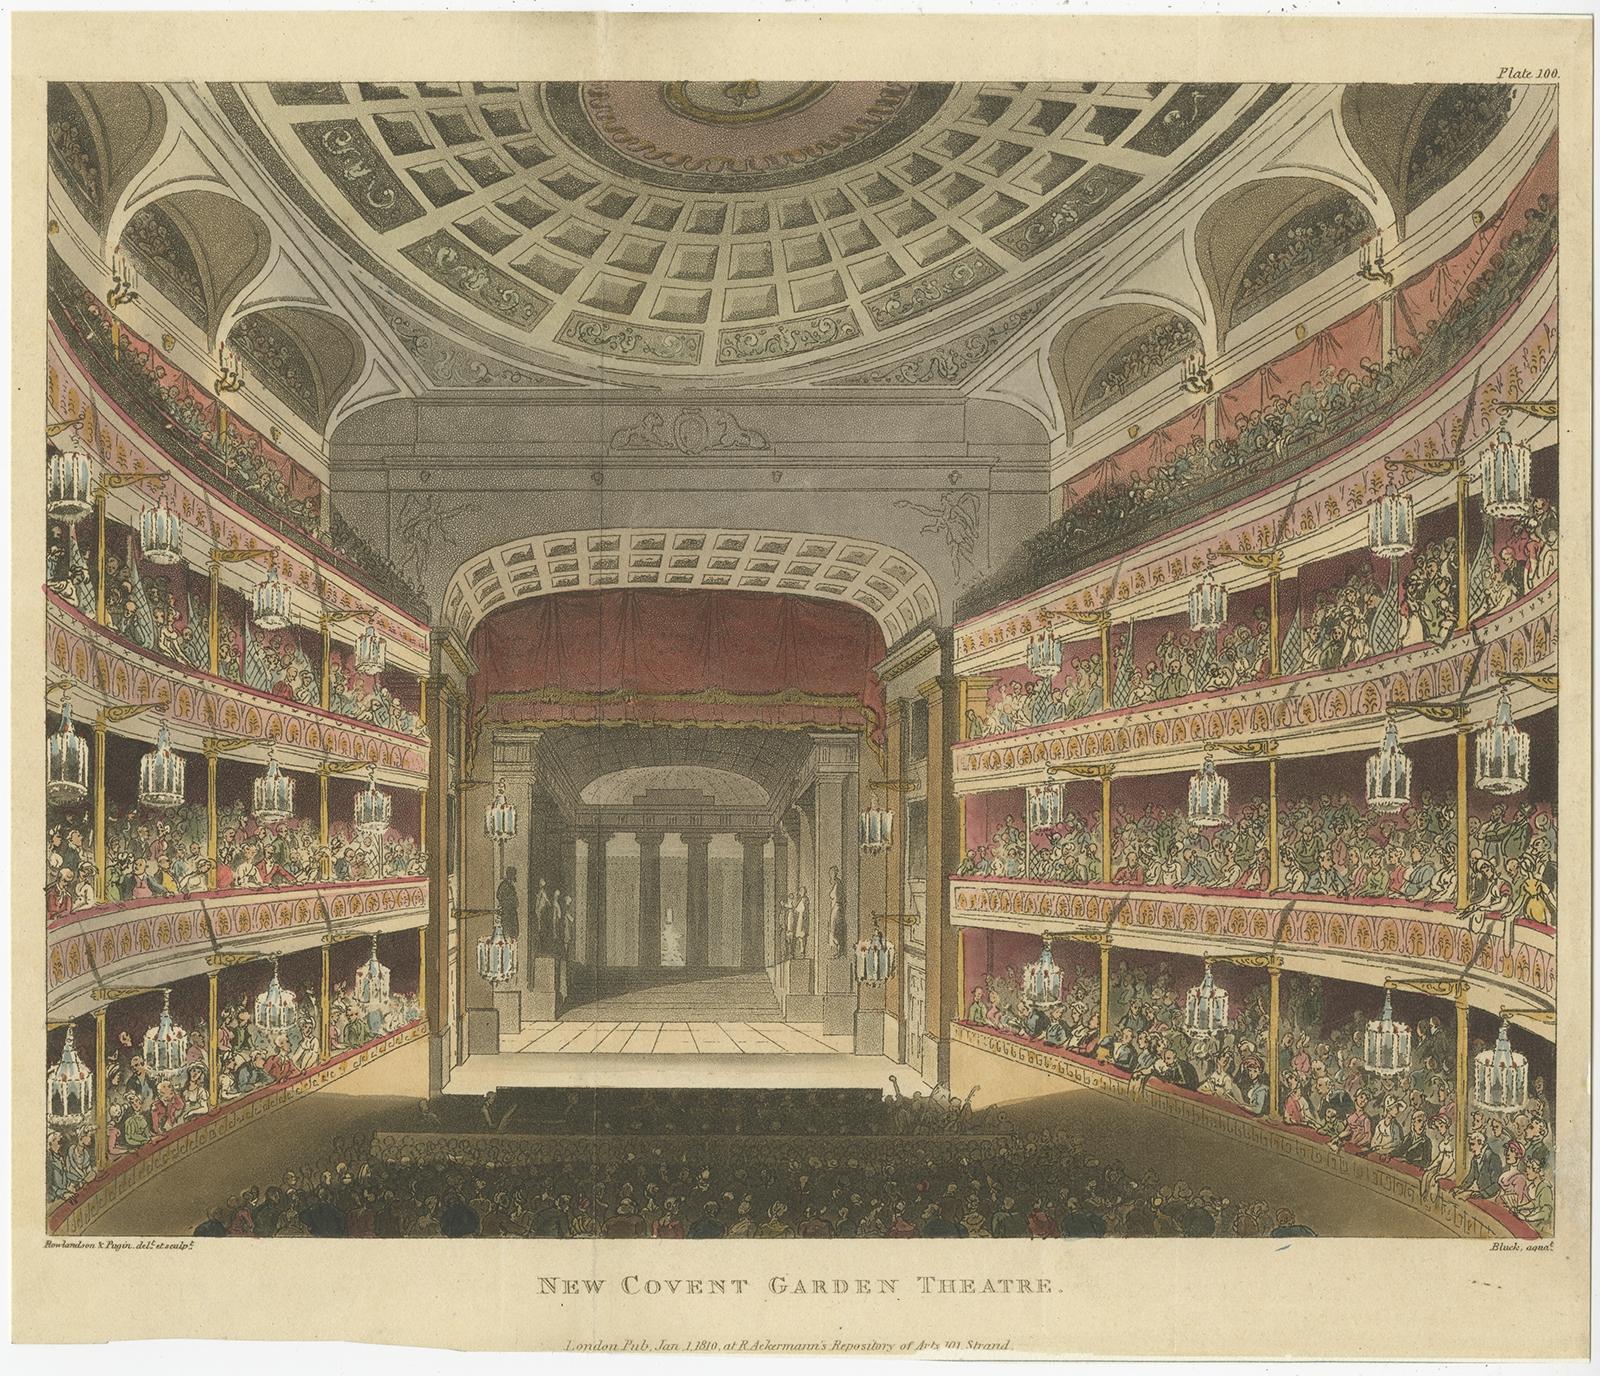 Antique print titled 'New Covent Garden Theatre'. 

Old print depicting the Theatre Royal (or Royal Opera House), Covent Garden. Published in Ackermann's 'Microcosm of London'.

Artists and Engravers: Published by R.